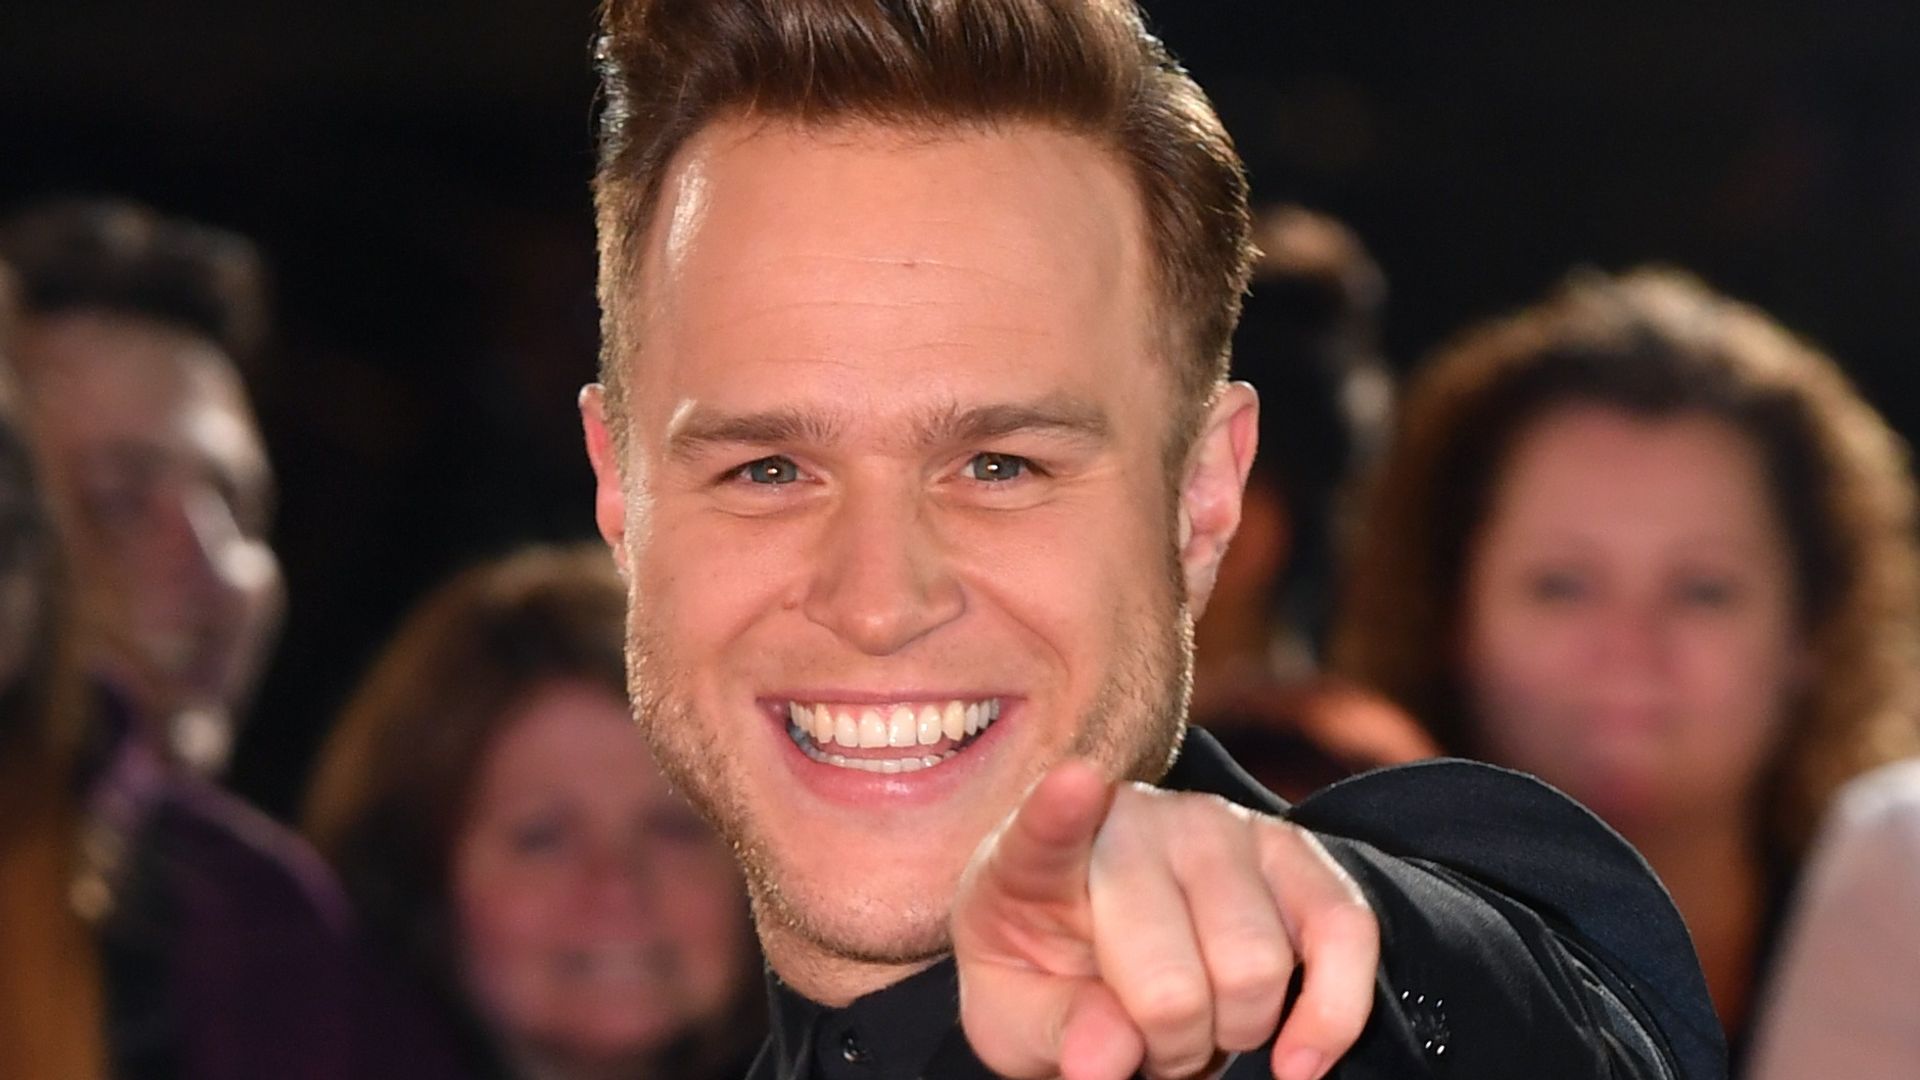 Olly Murs pointing at the camera in a black suit